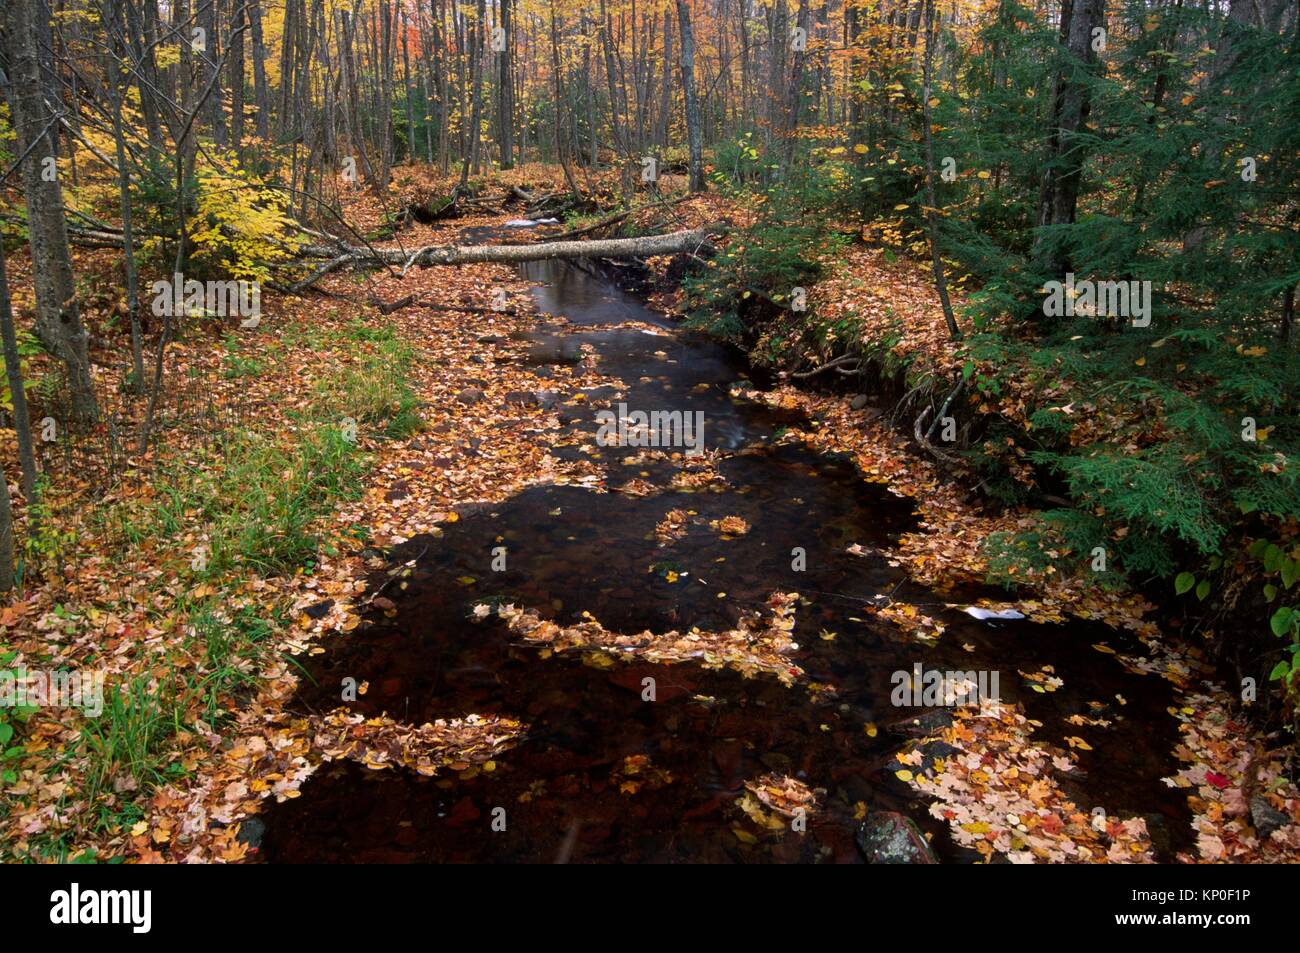 Morgan Creek, Chequamegon-Nicolet National Forest, Wisconsin. Stock Photo